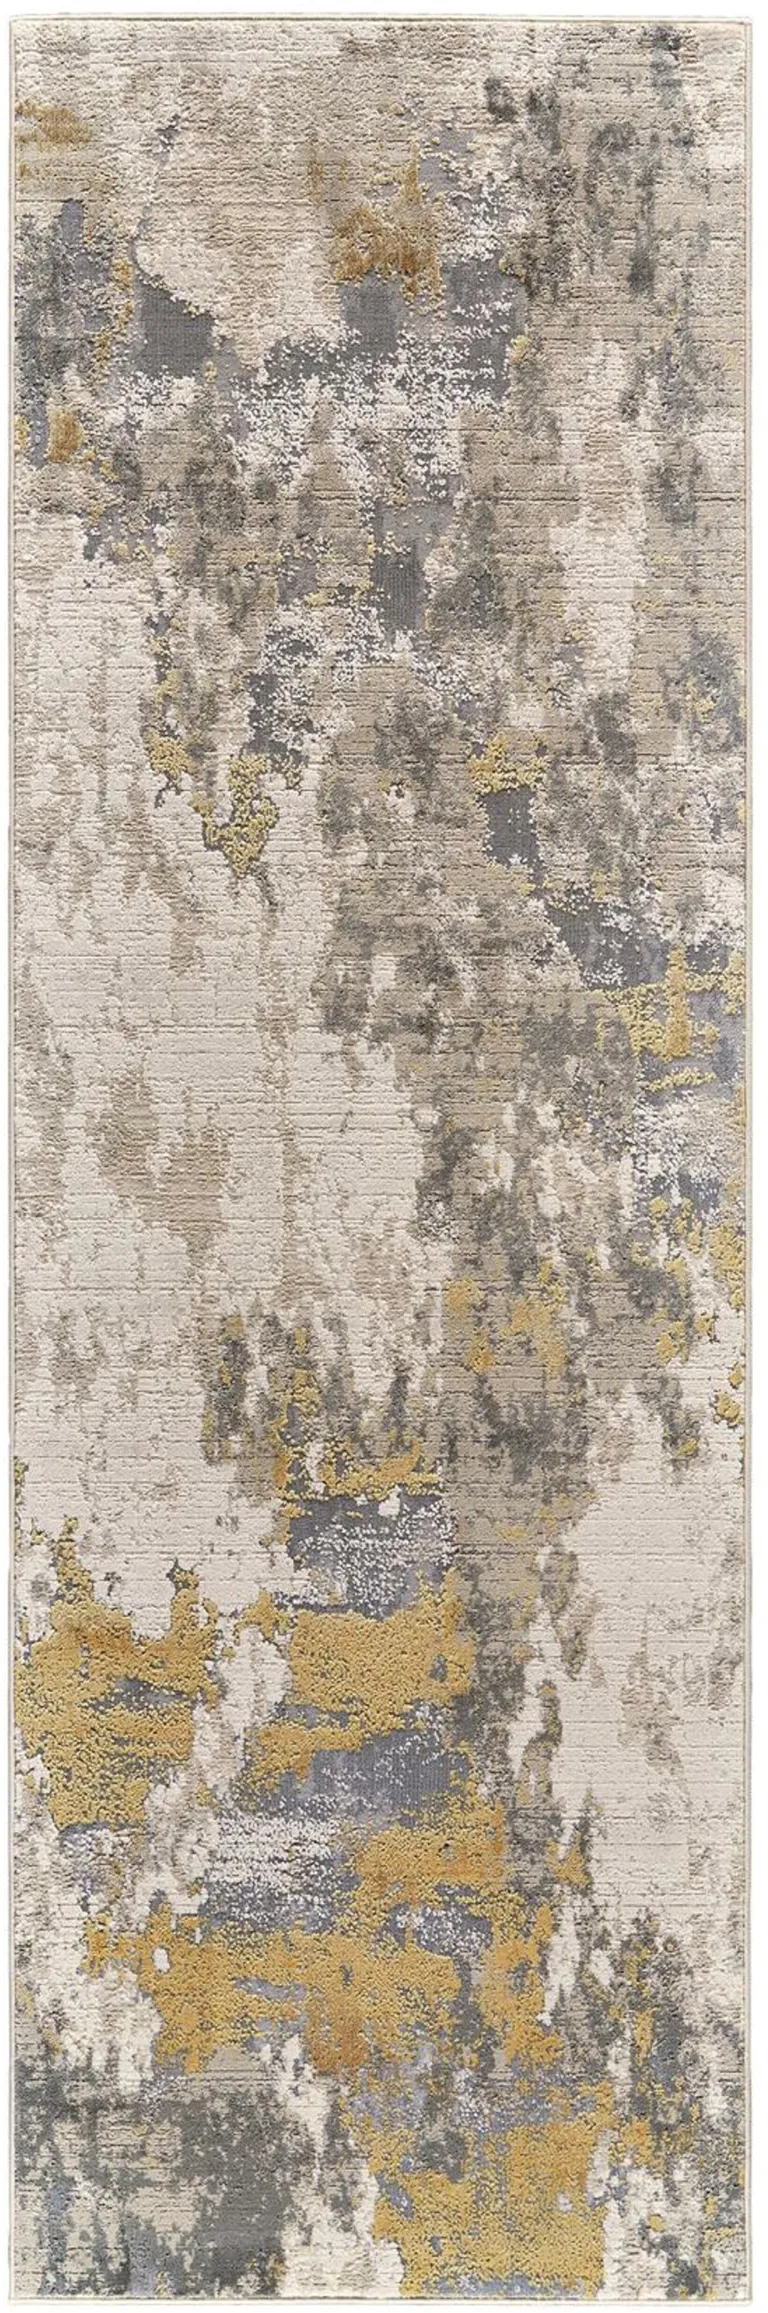 8' Ivory Gold And Gray Abstract Stain Resistant Runner Rug Photo 1